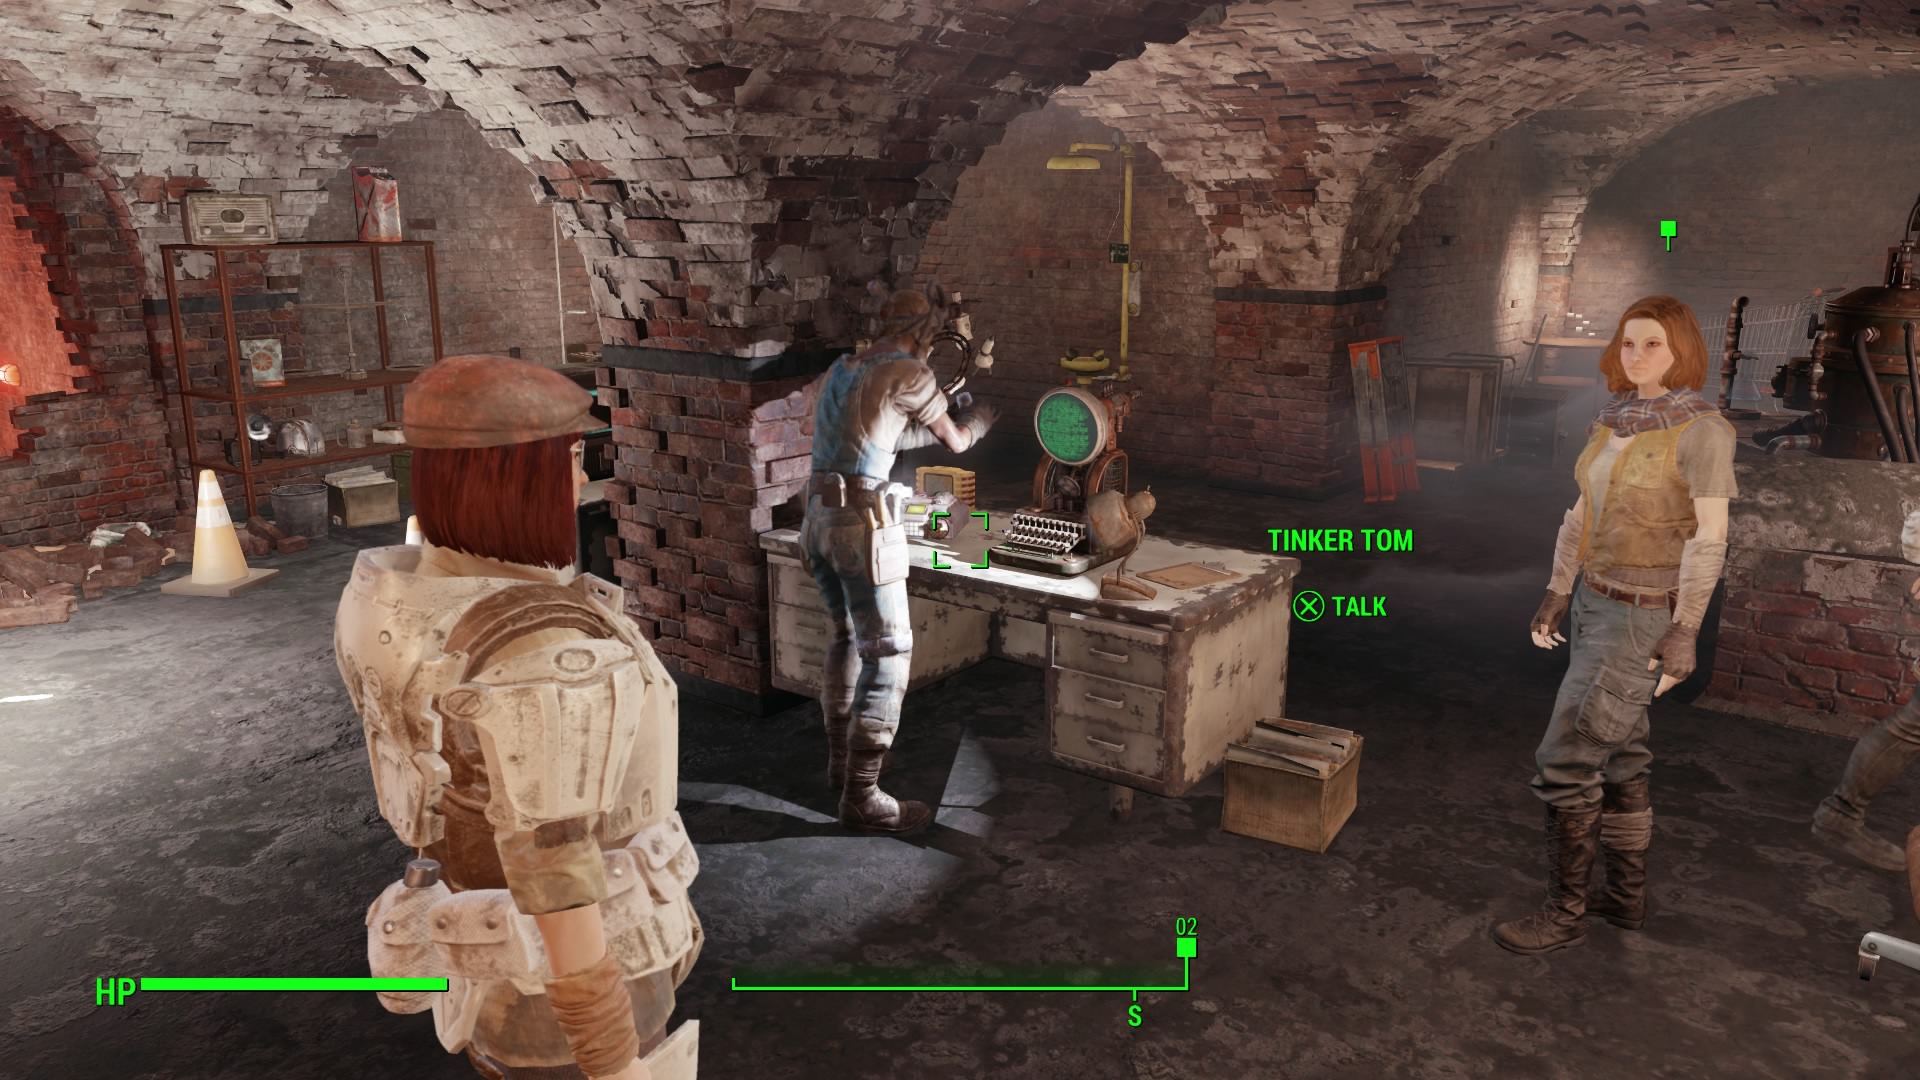 Day 33 with Fallout 4: The Plot Moves Forward then Stands Still